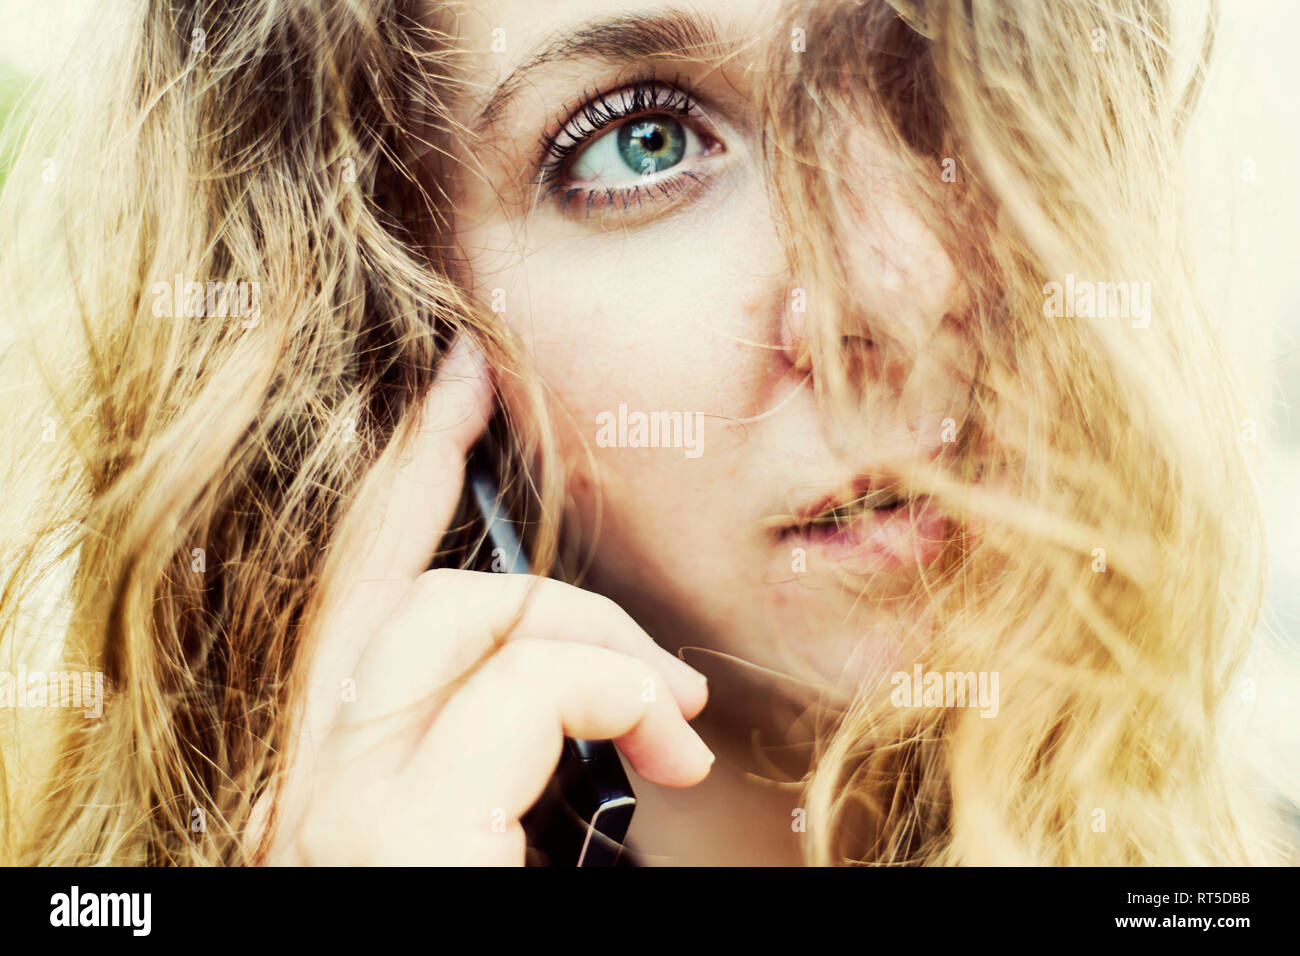 Portrait of young woman on the phone, close-up Stock Photo